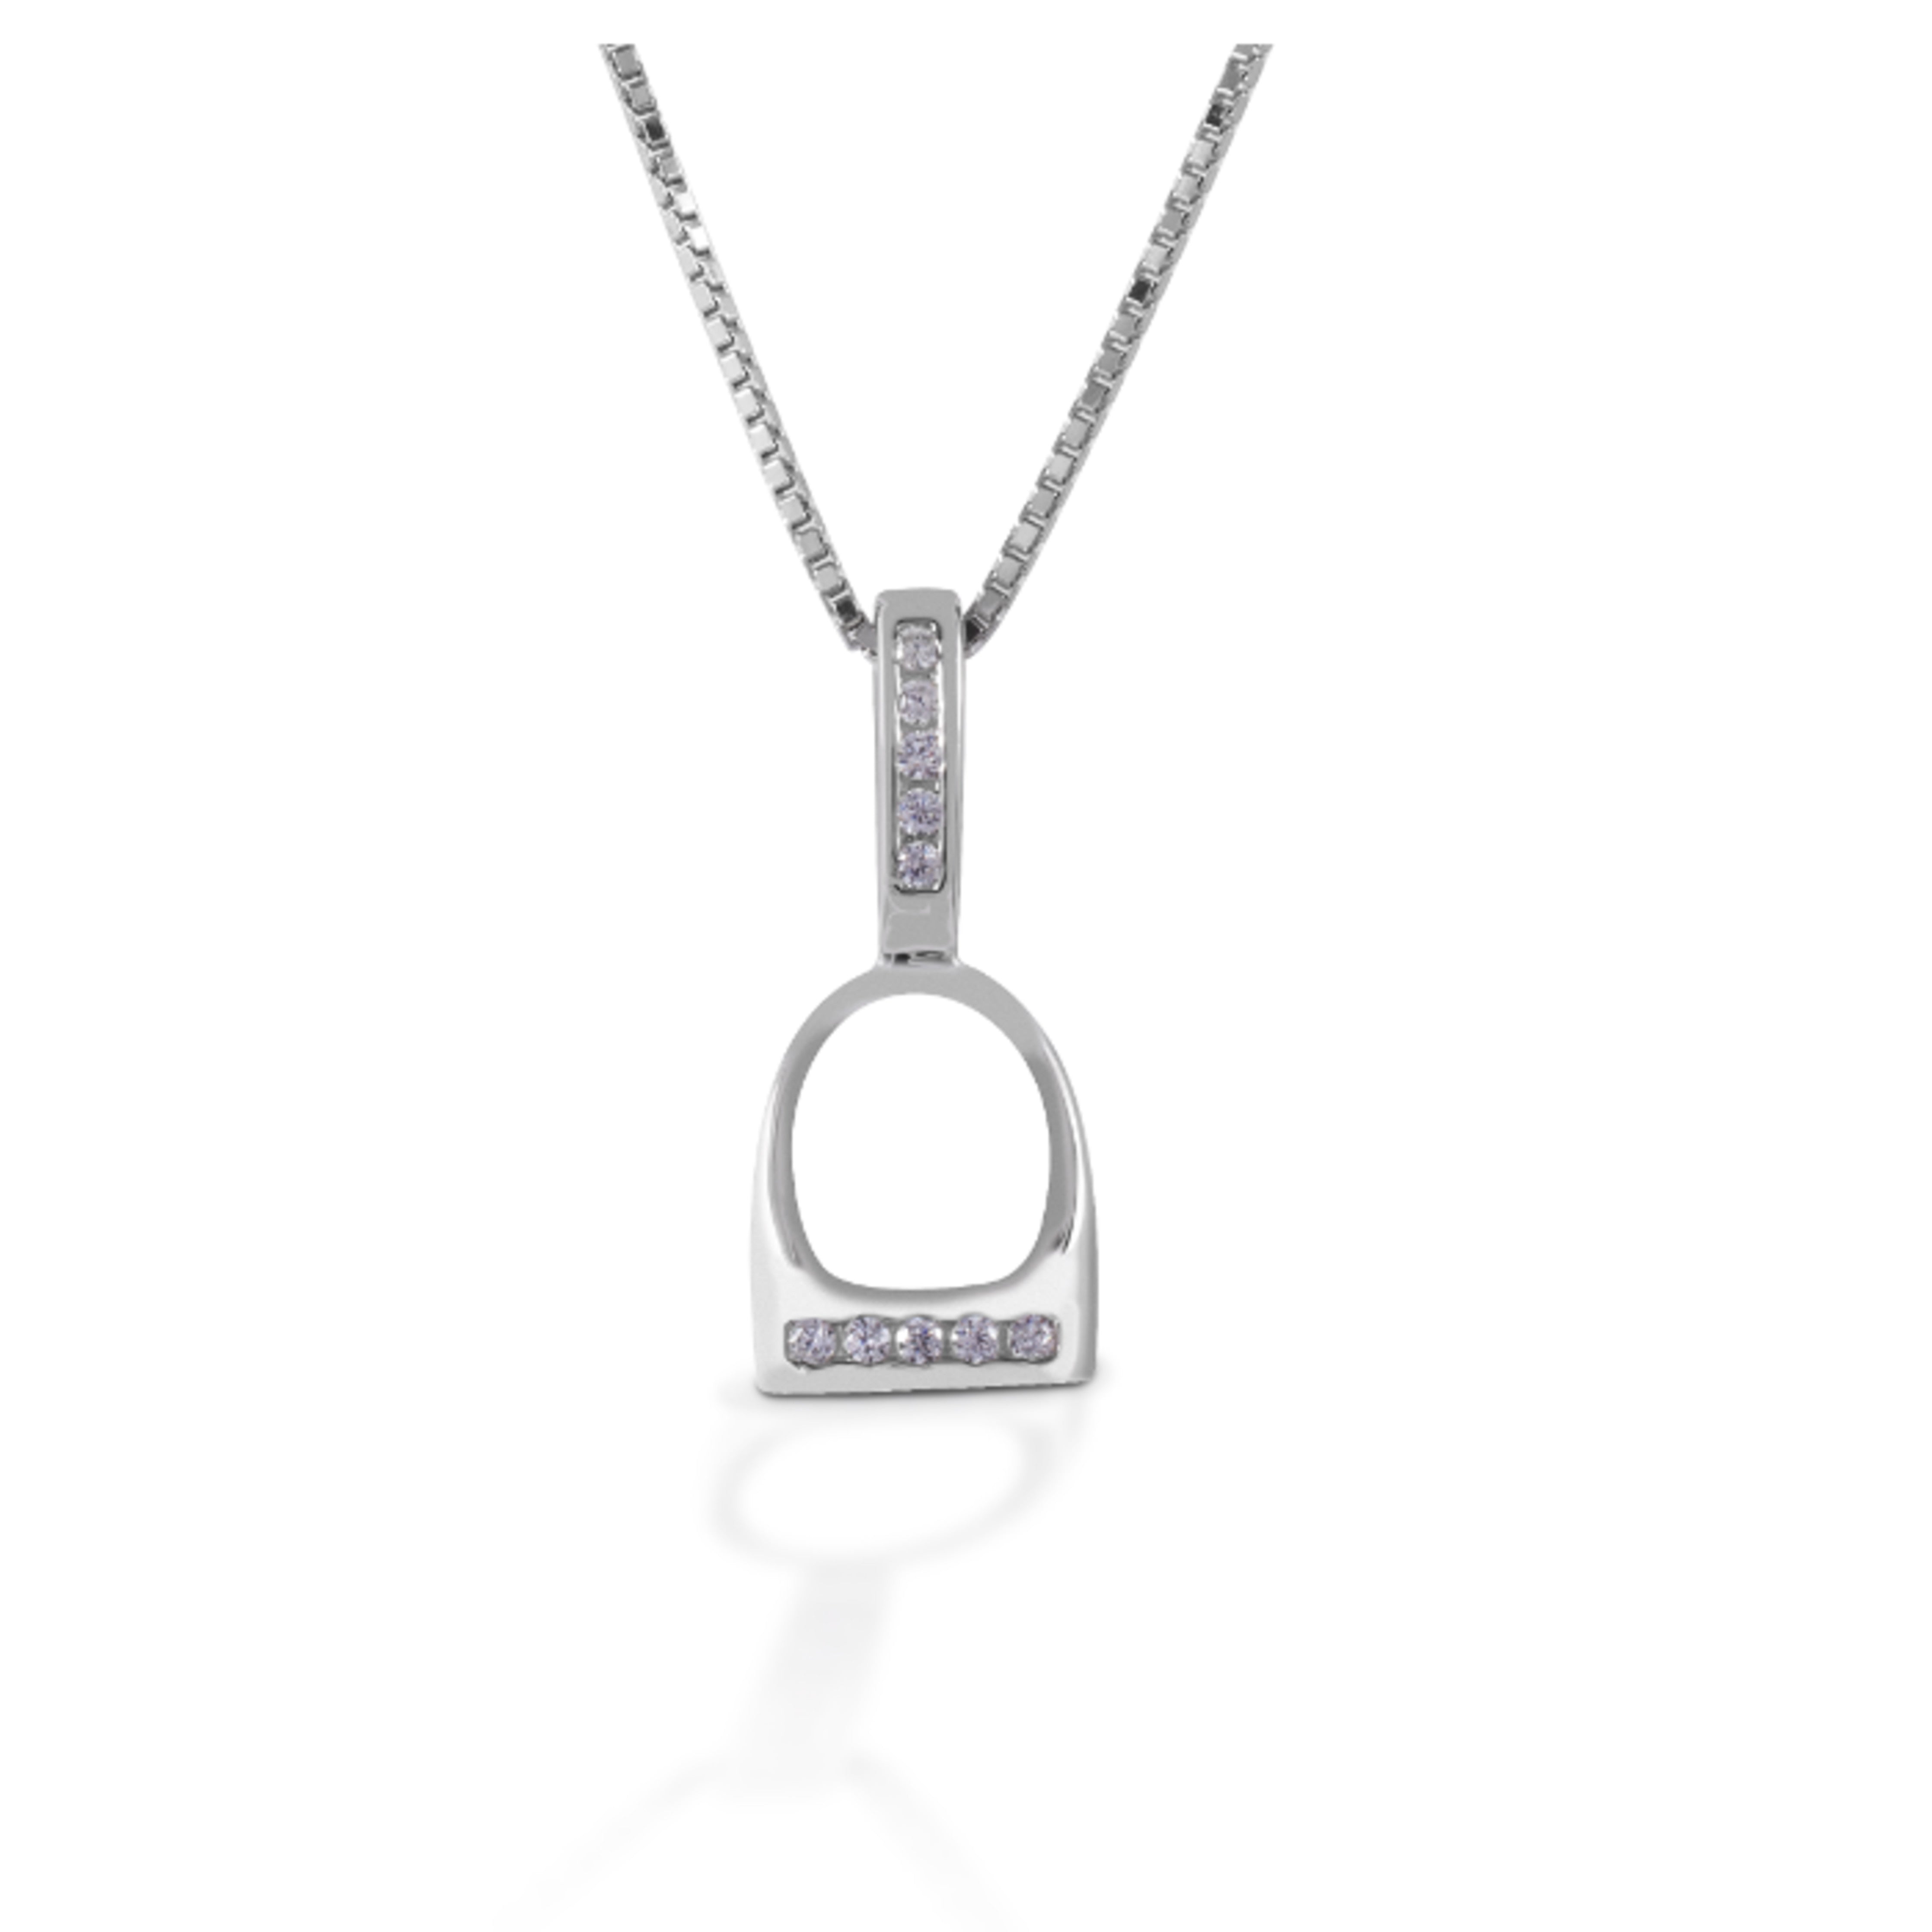 Kelly Herd Necklace Small English Stirrup Sterling